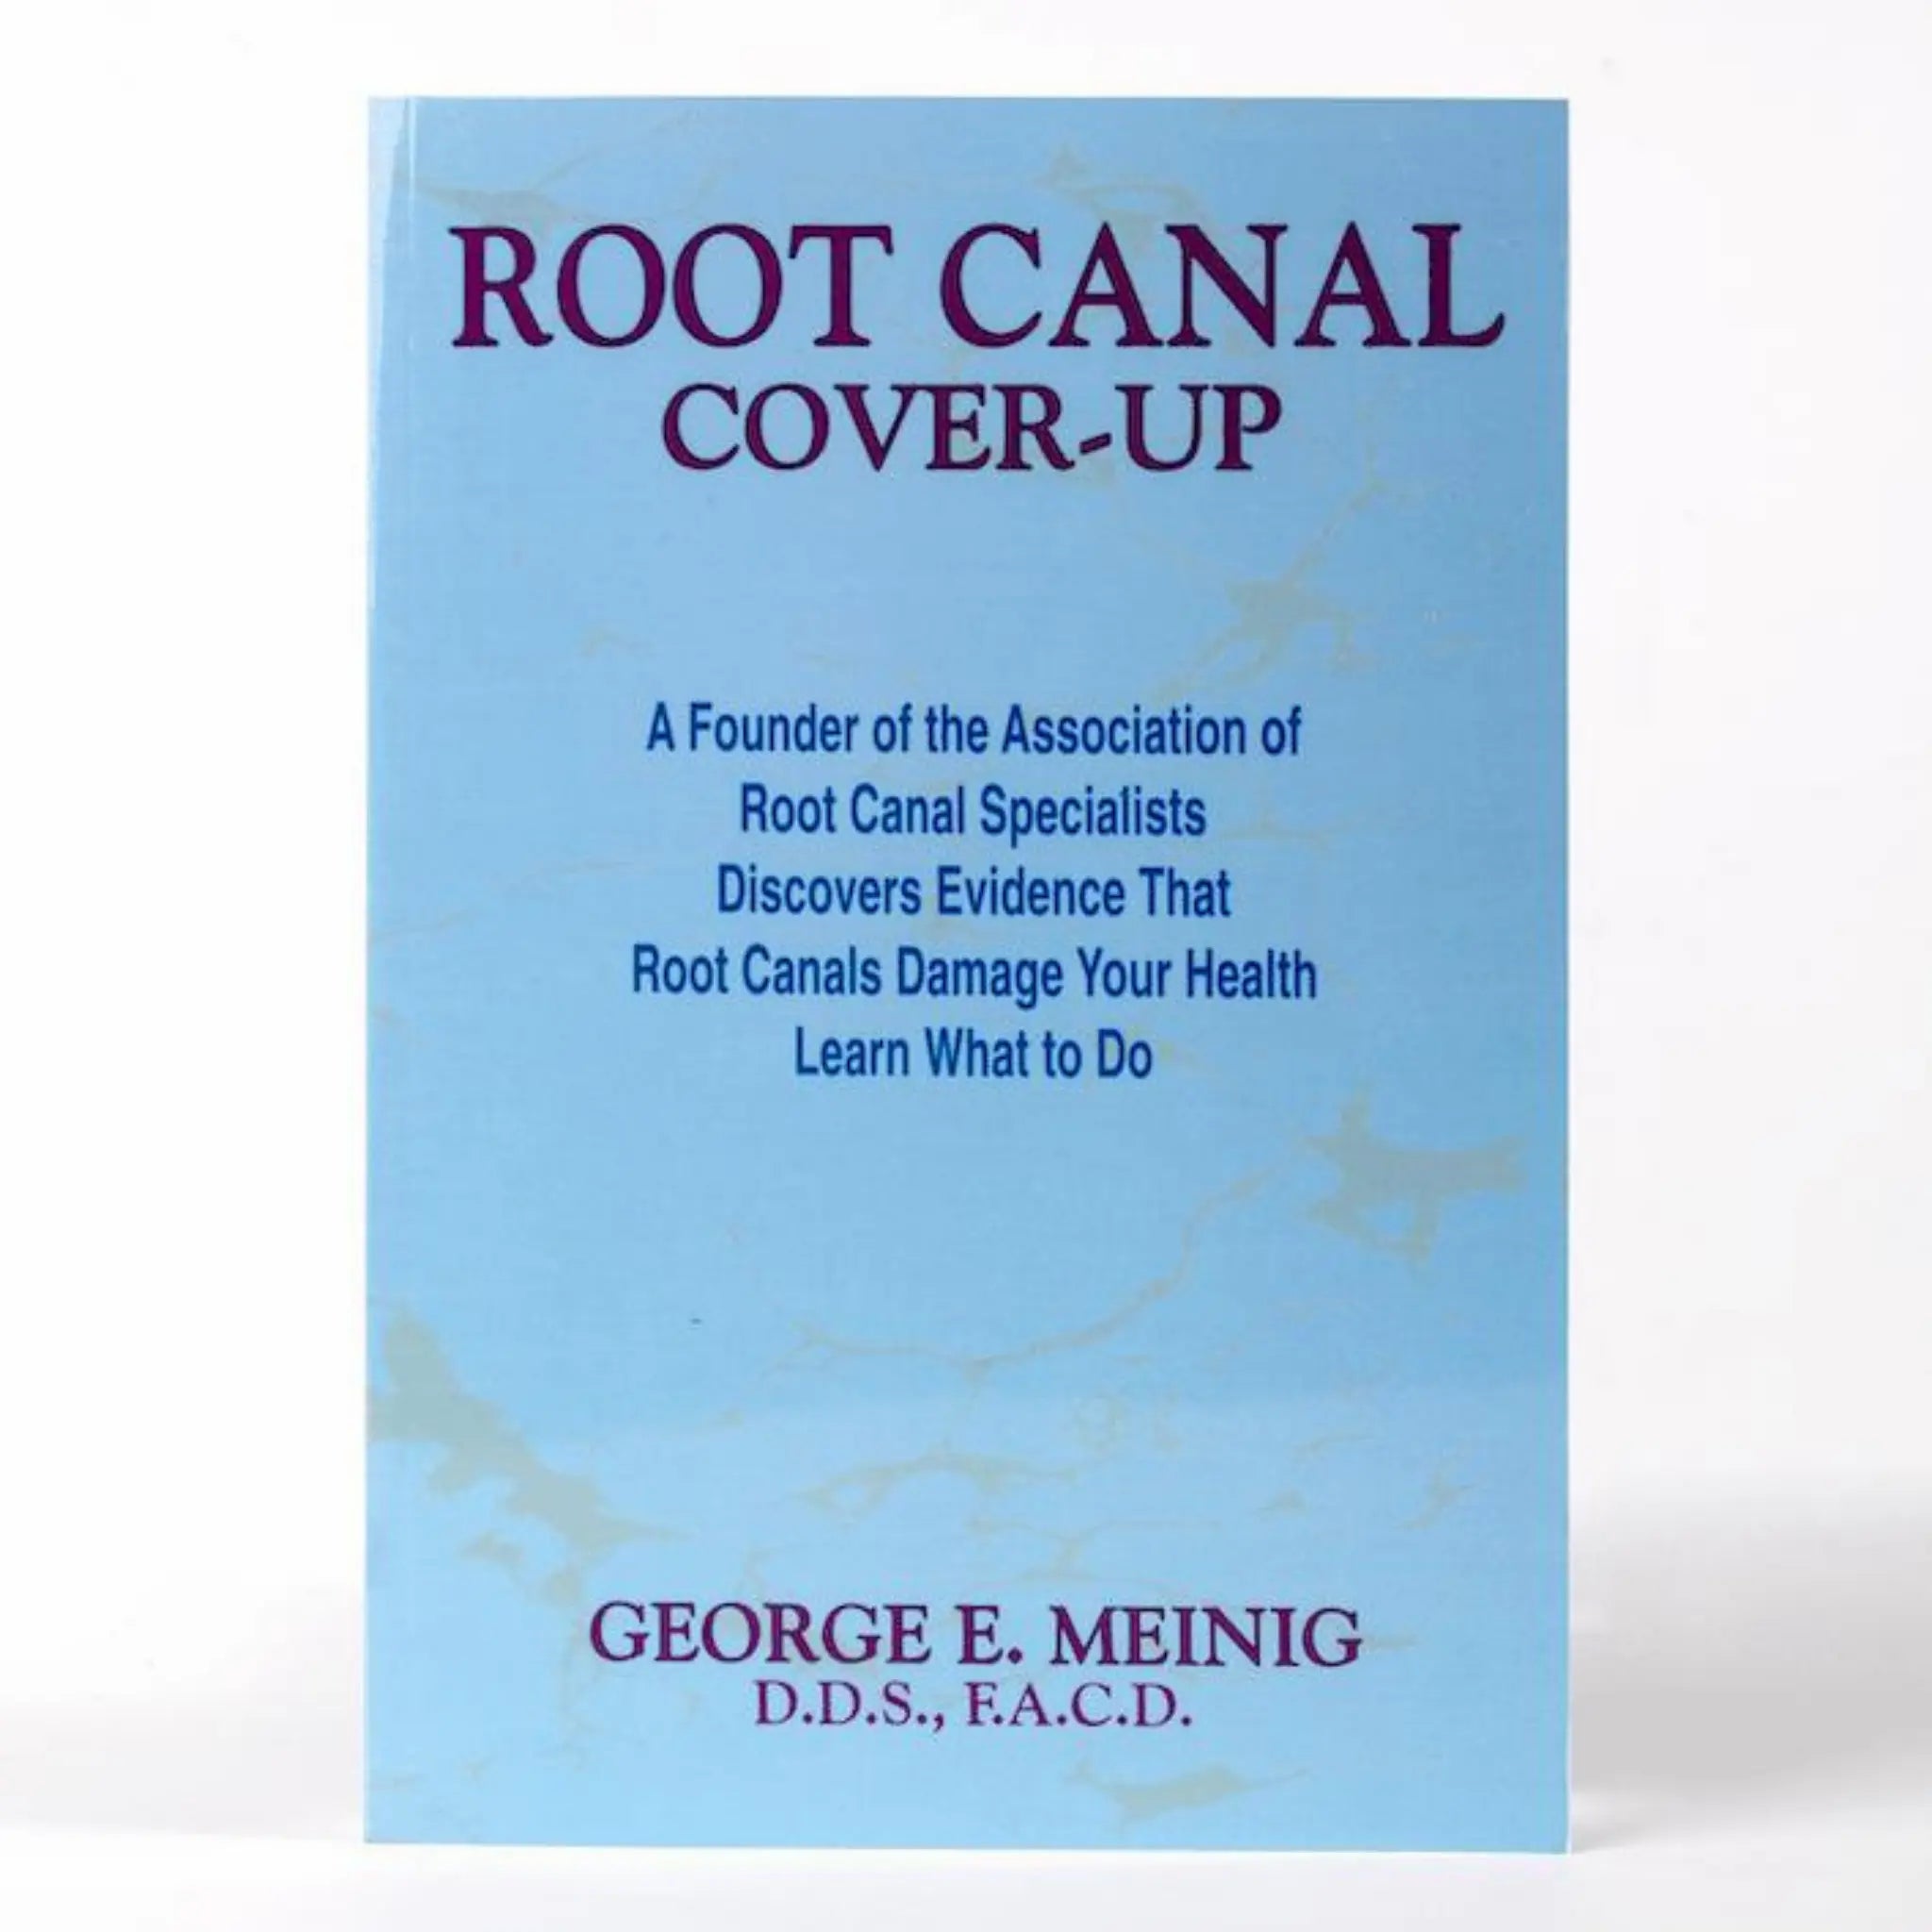 Root Canal Cover-Up